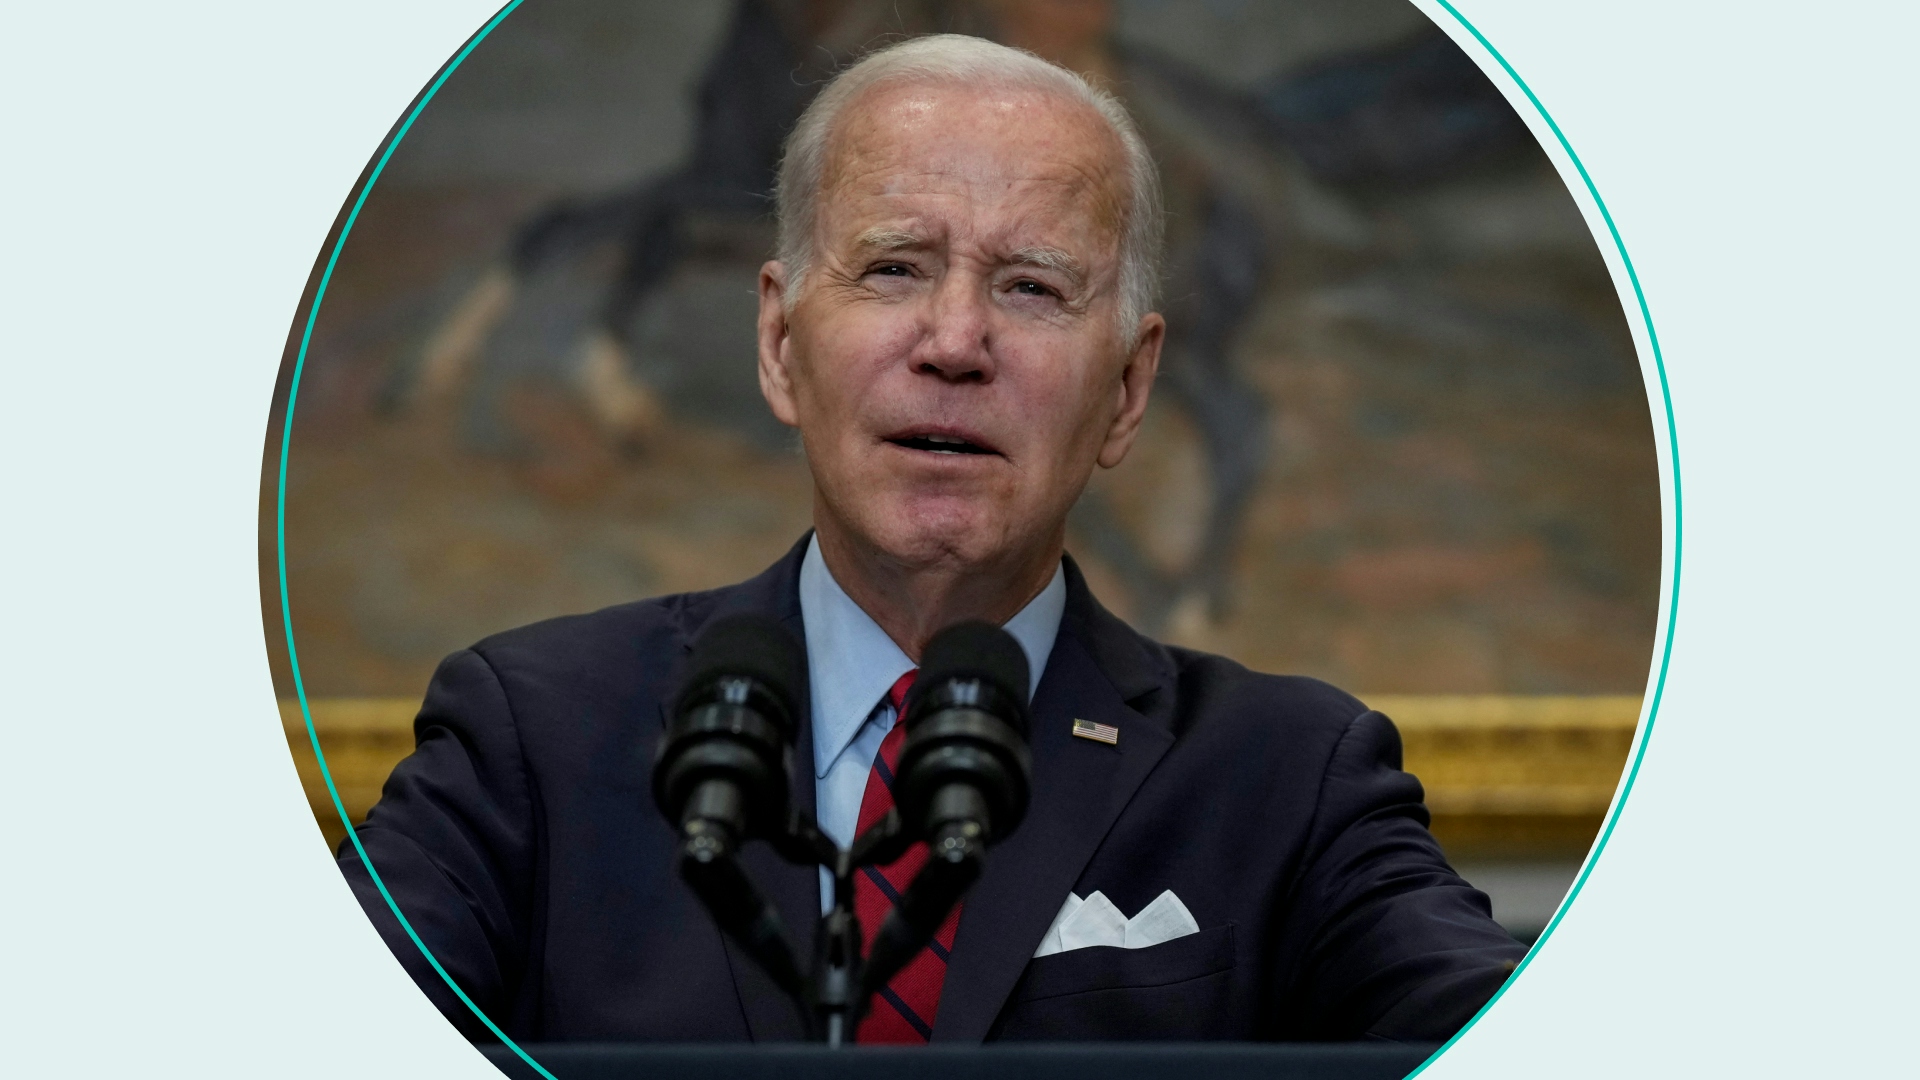 U.S. President Joe Biden delivers remarks about border security policies in the Roosevelt Room in the White House on January 5, 2023 in Washington, DC.